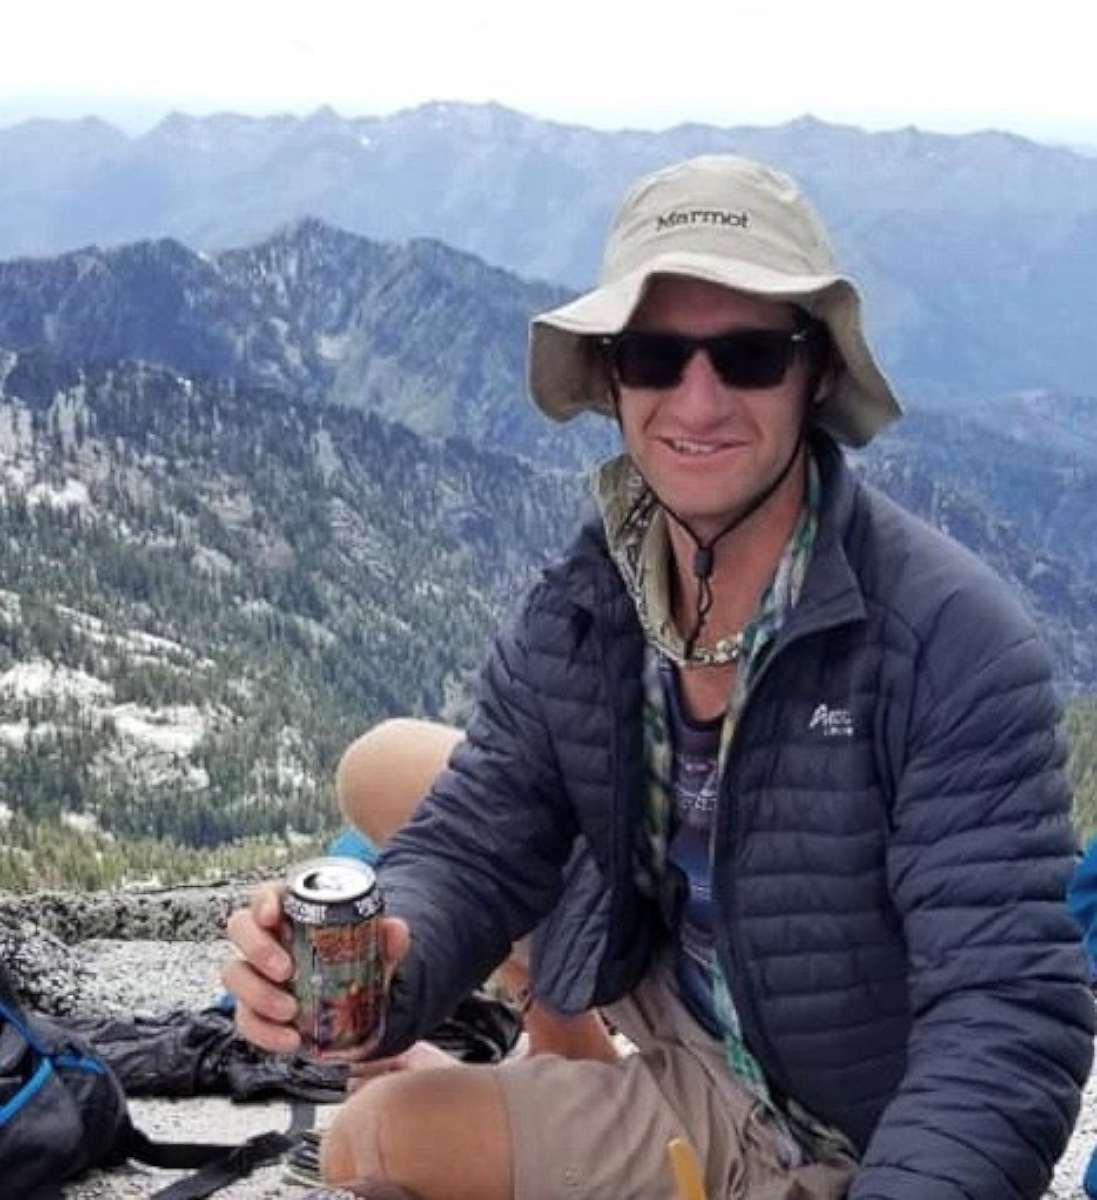 PHOTO: Daniel Komins, 35, went on a hiking trip in the Trinity Alps in Northern California on Aug. 10, 2019, and has not been seen since the following day. He was expected to return Wednesday.